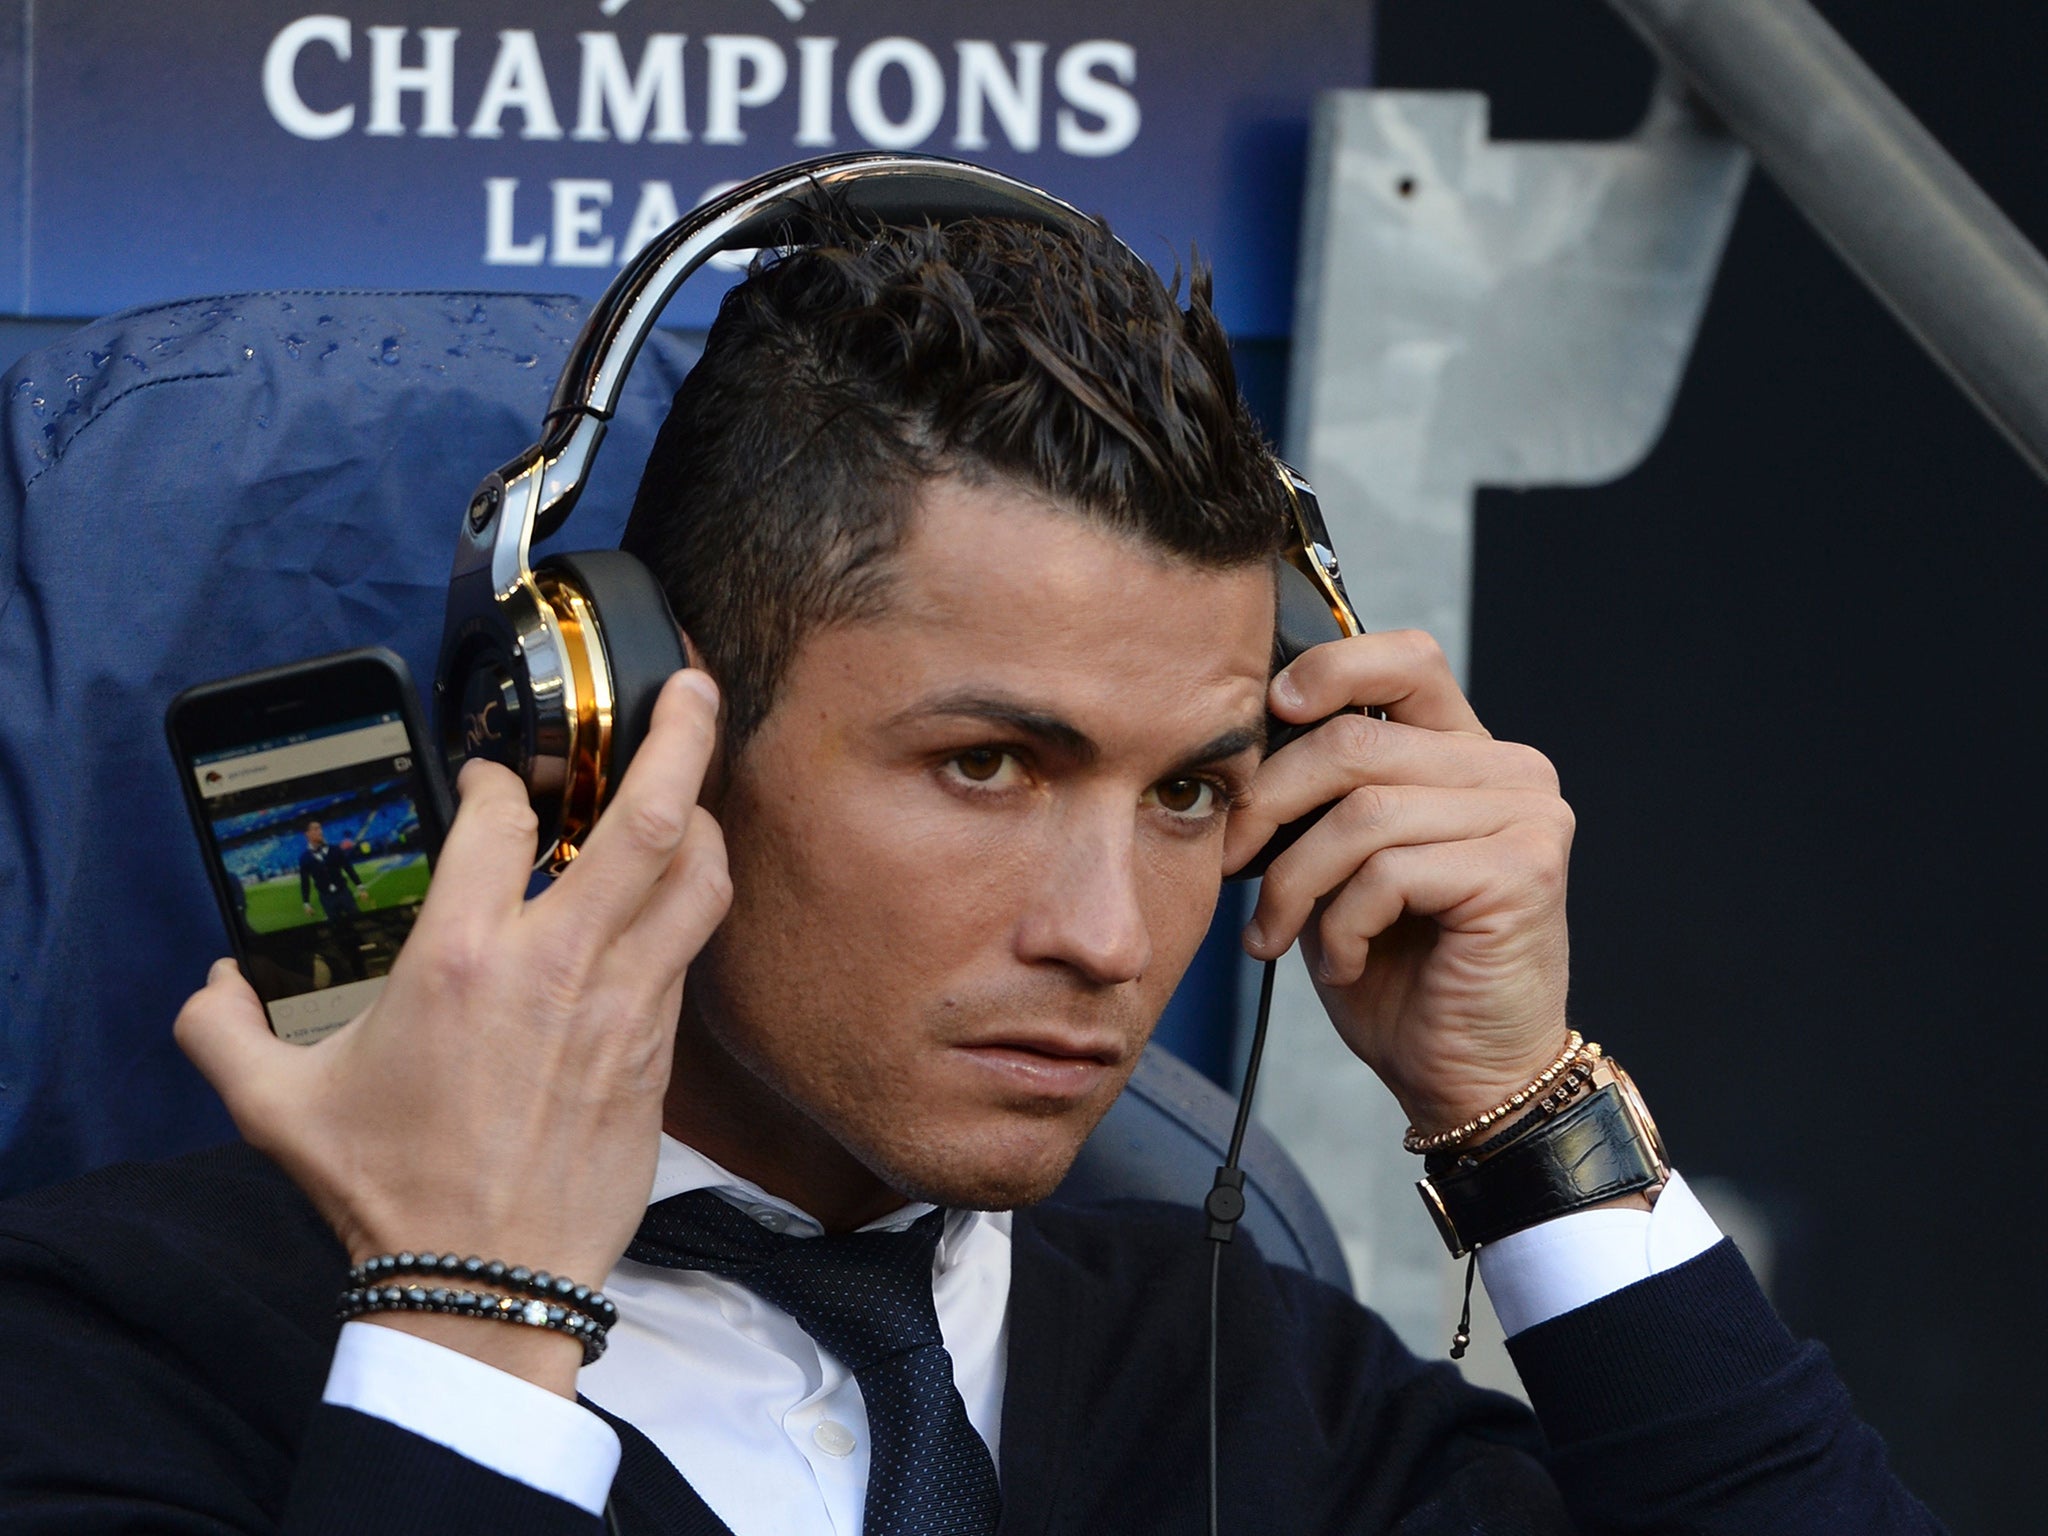 Cristiano Ronaldo spotted watching a video of himself